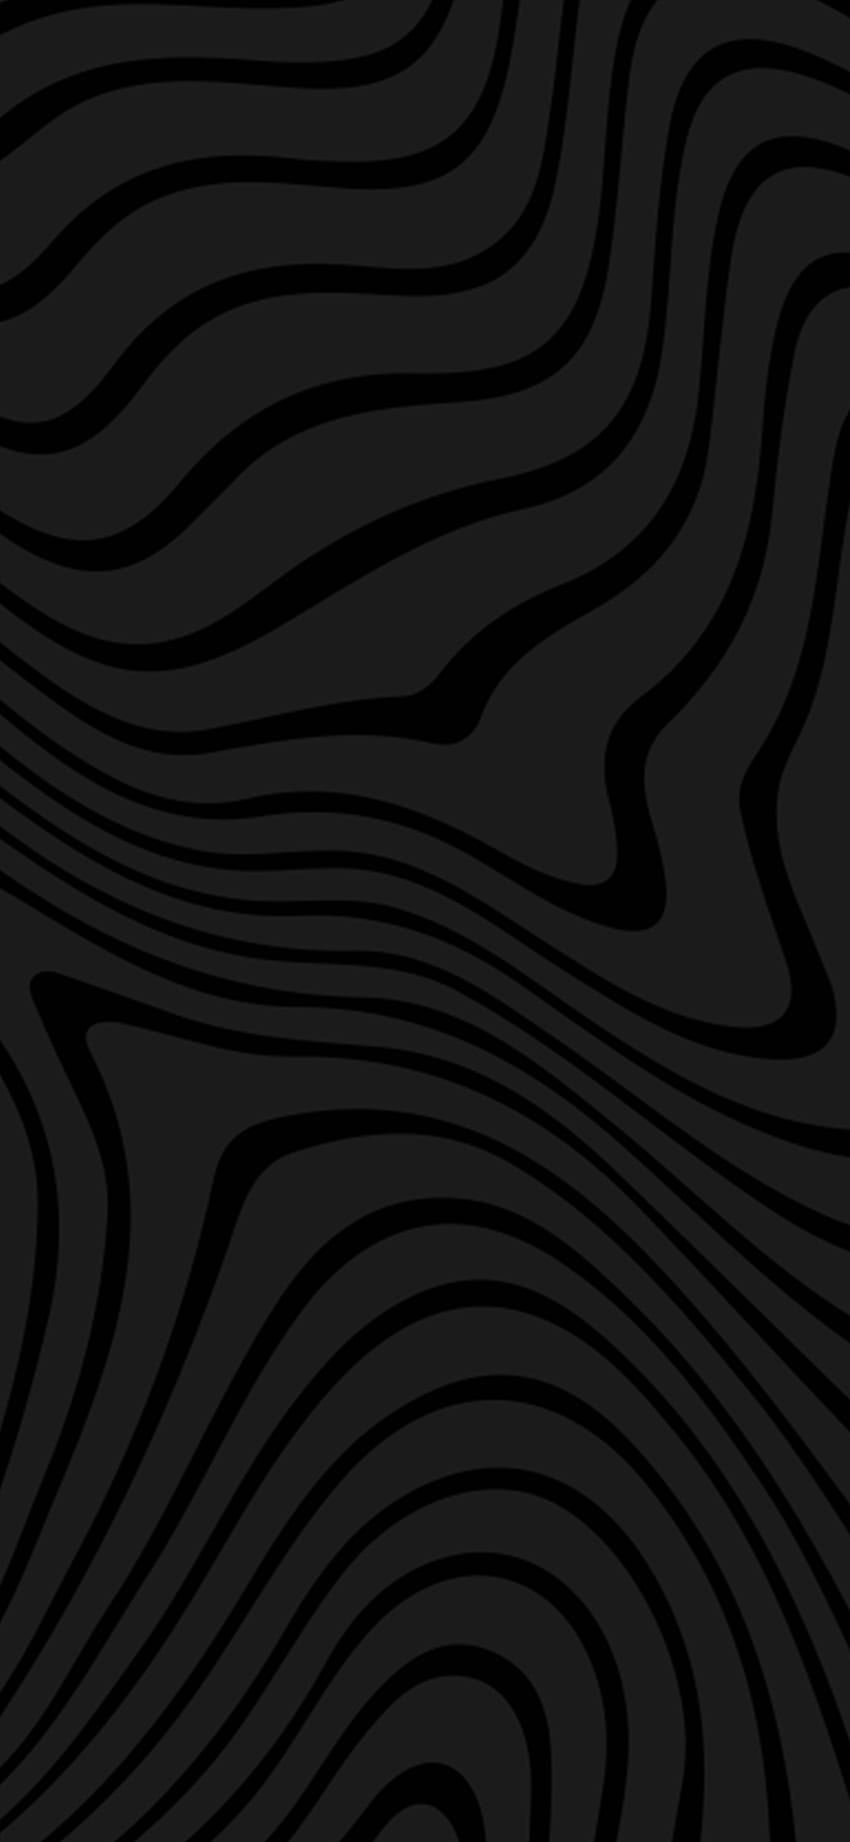 PewDiePie waves (red and triple black) Phone and : dbrand, Waves Black and White HD phone wallpaper